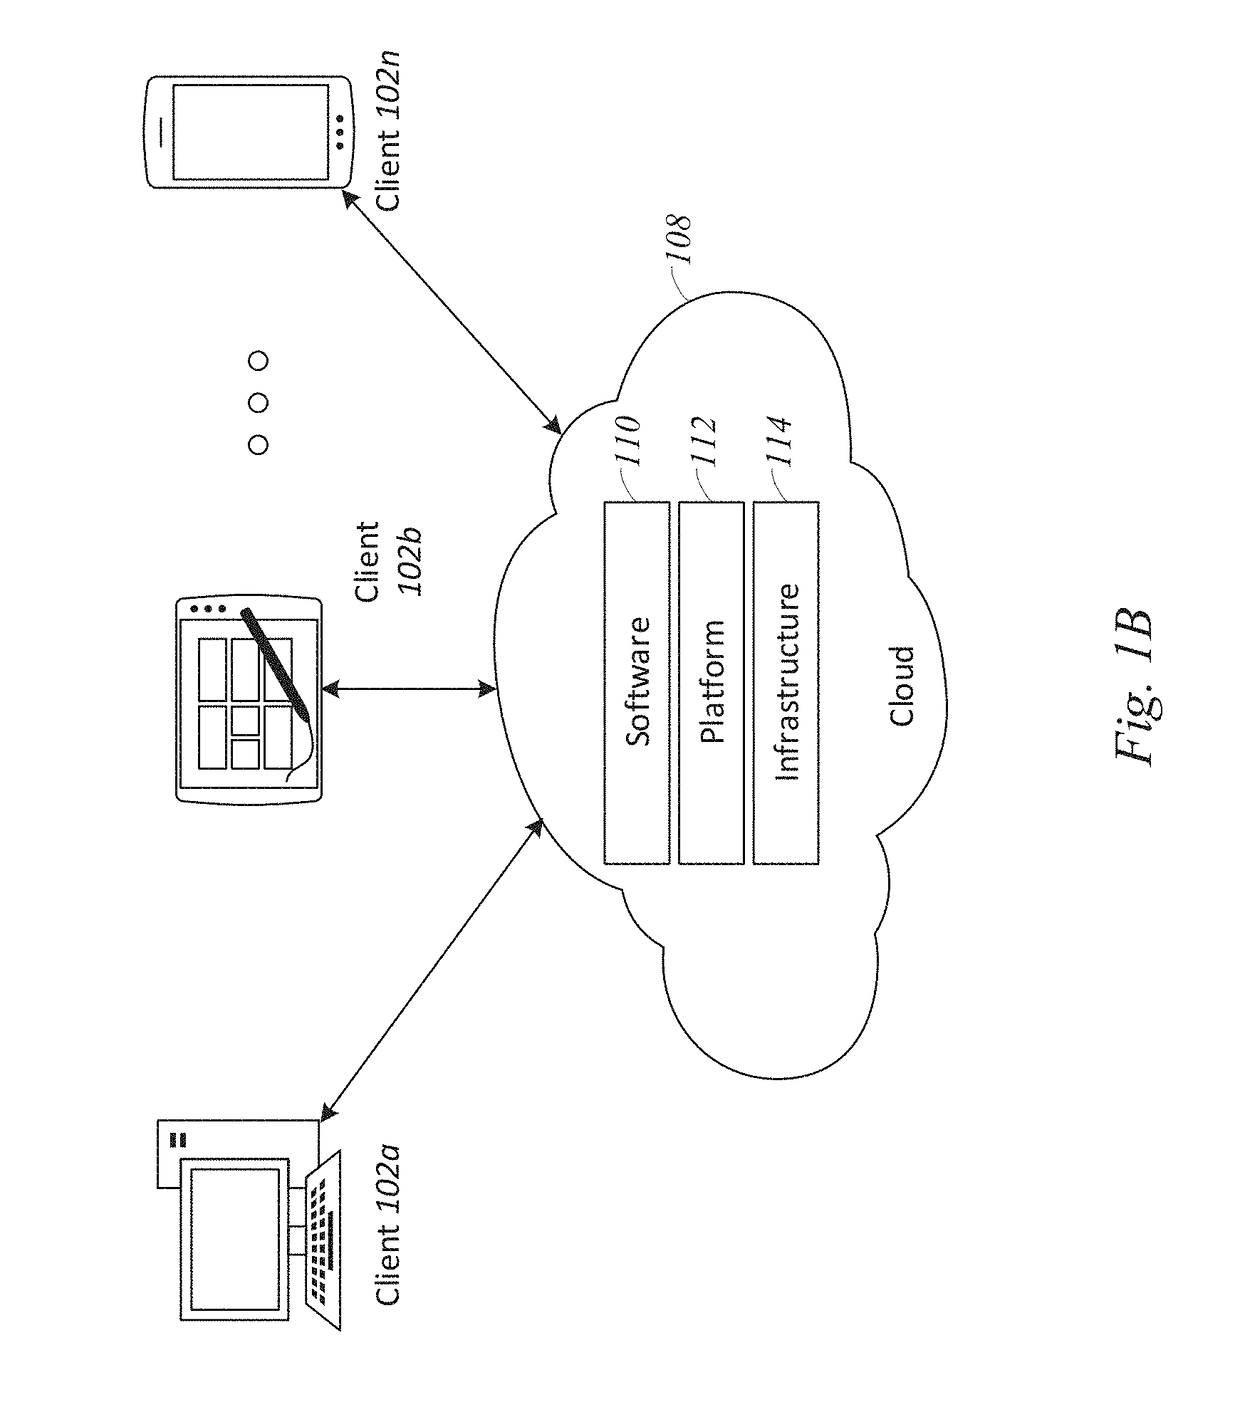 Systems and methods for discovering and alerting users of potentially hazardous messages